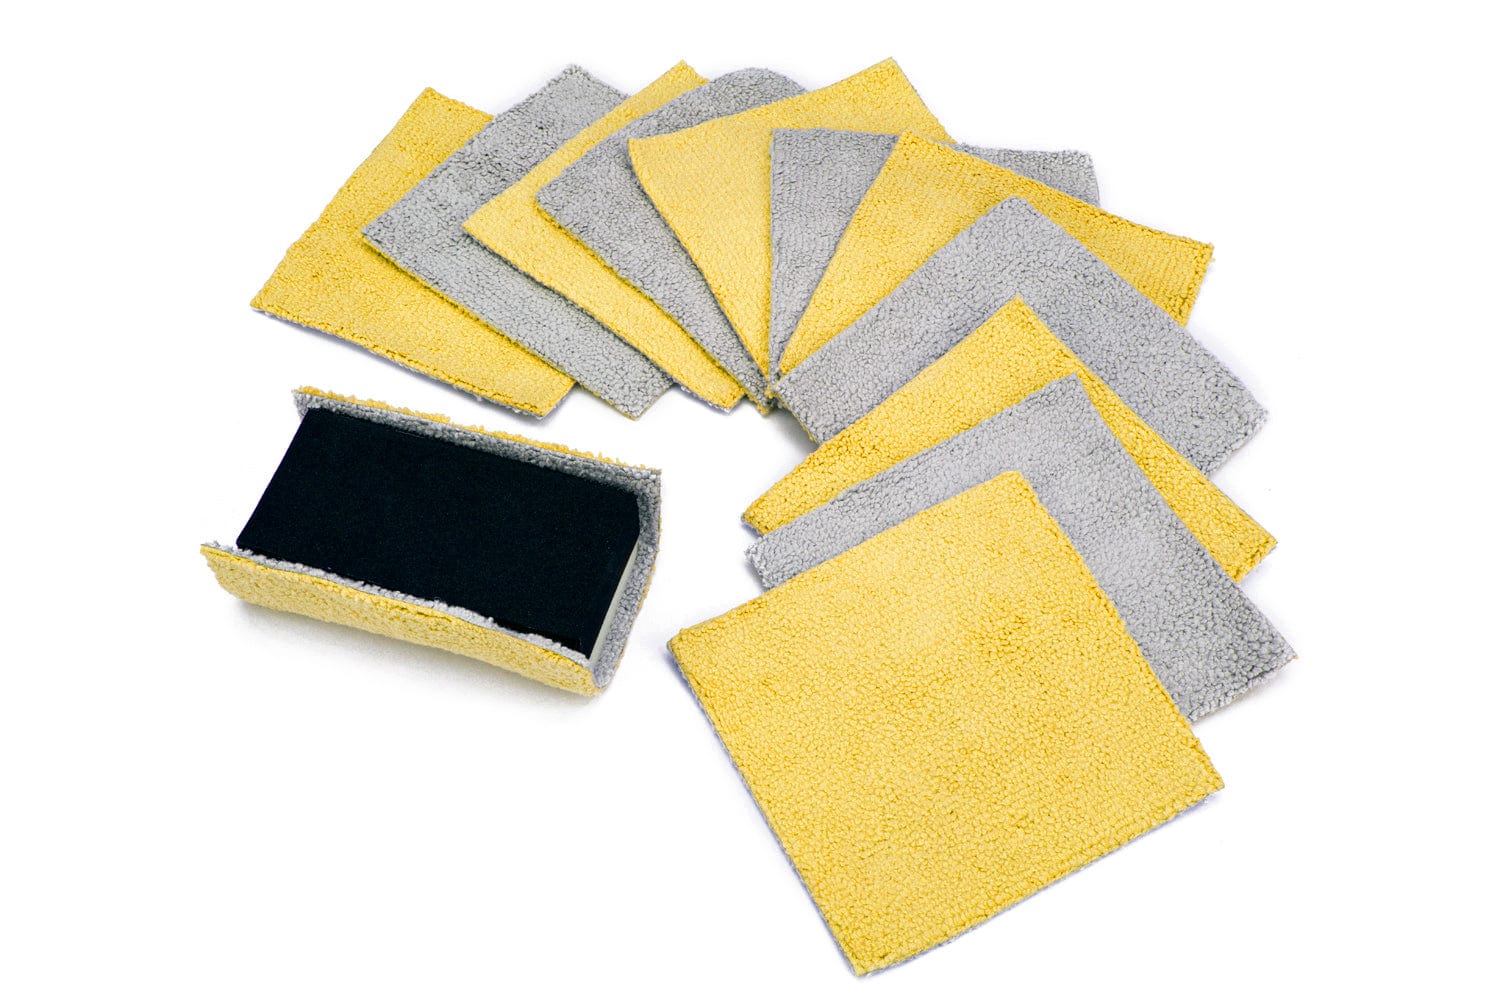 Autofiber Applicator 1 Block + 12 Gold/Gray Sheets [Saver Block & Refill] Coating Applicator Foam Block with Side Velcro and Refill Saver Sheets with Barrier Layer (3.5 in. x 2 in. x 1 in.) - 12 pack